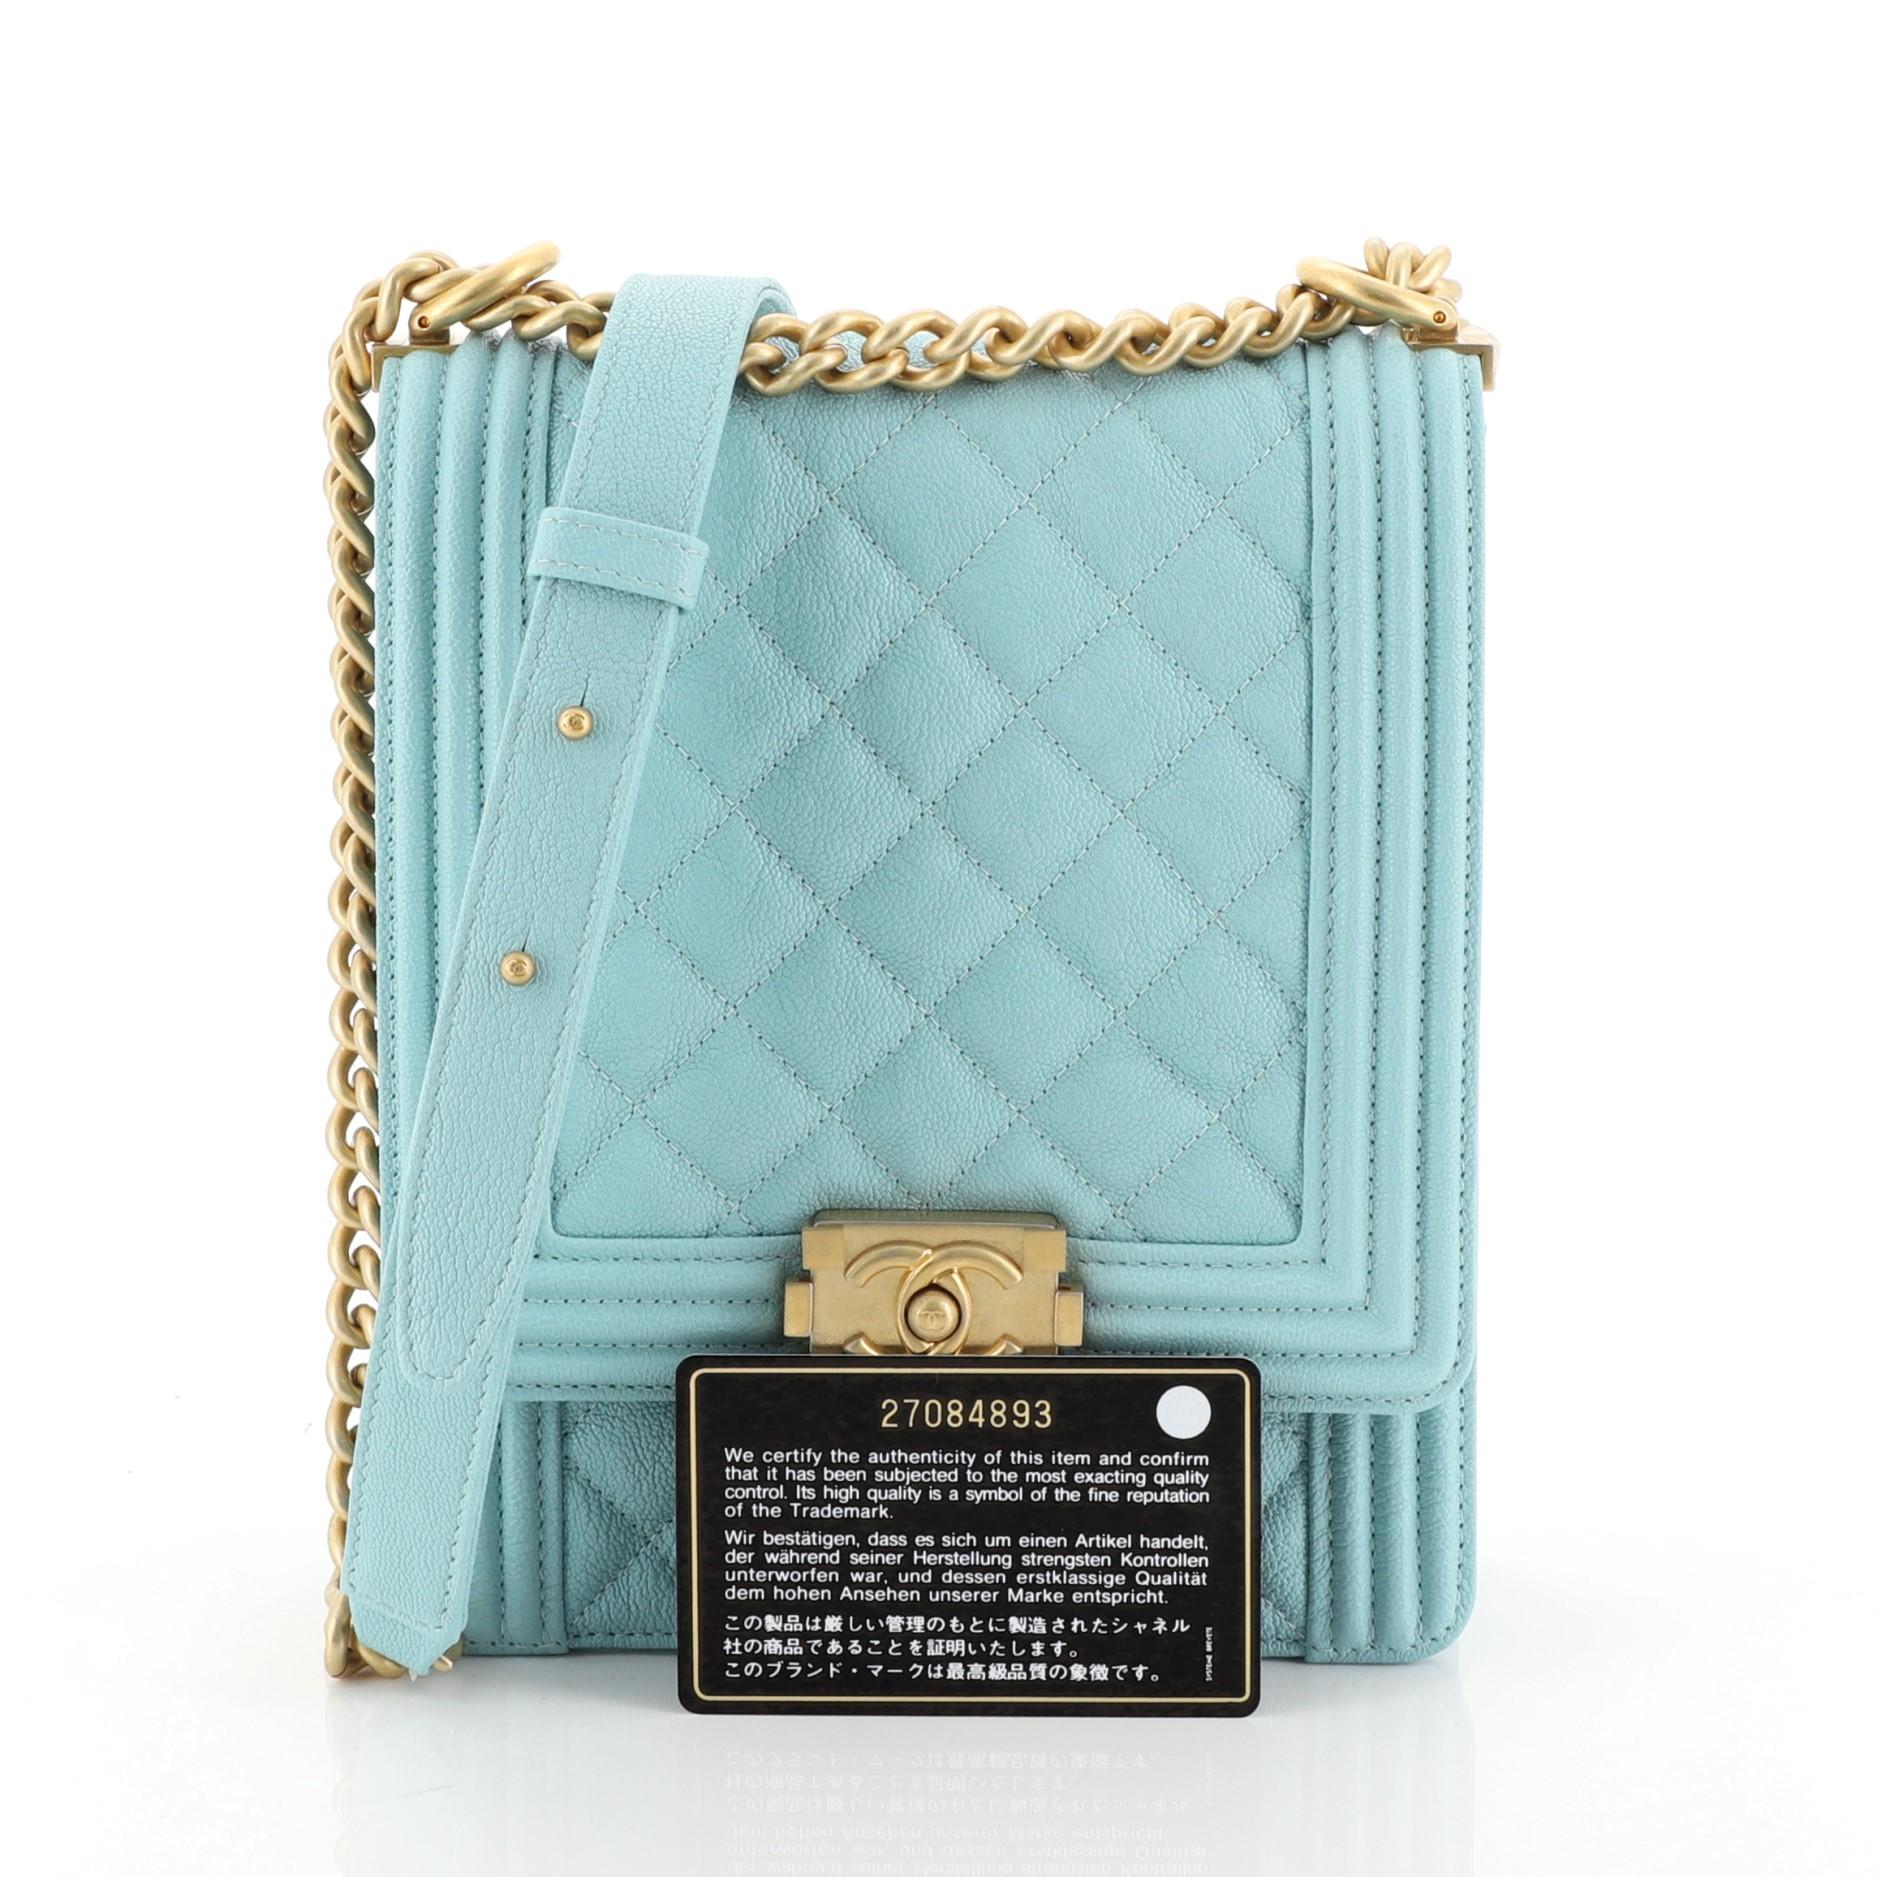 This Chanel North South Boy Flap Bag Quilted Caviar Small, crafted from blue quilted caviar leather, features chain link strap with adjustable leather pad and matte gold-tone hardware. Its CC boy push lock closure opens to a blue fabric interior